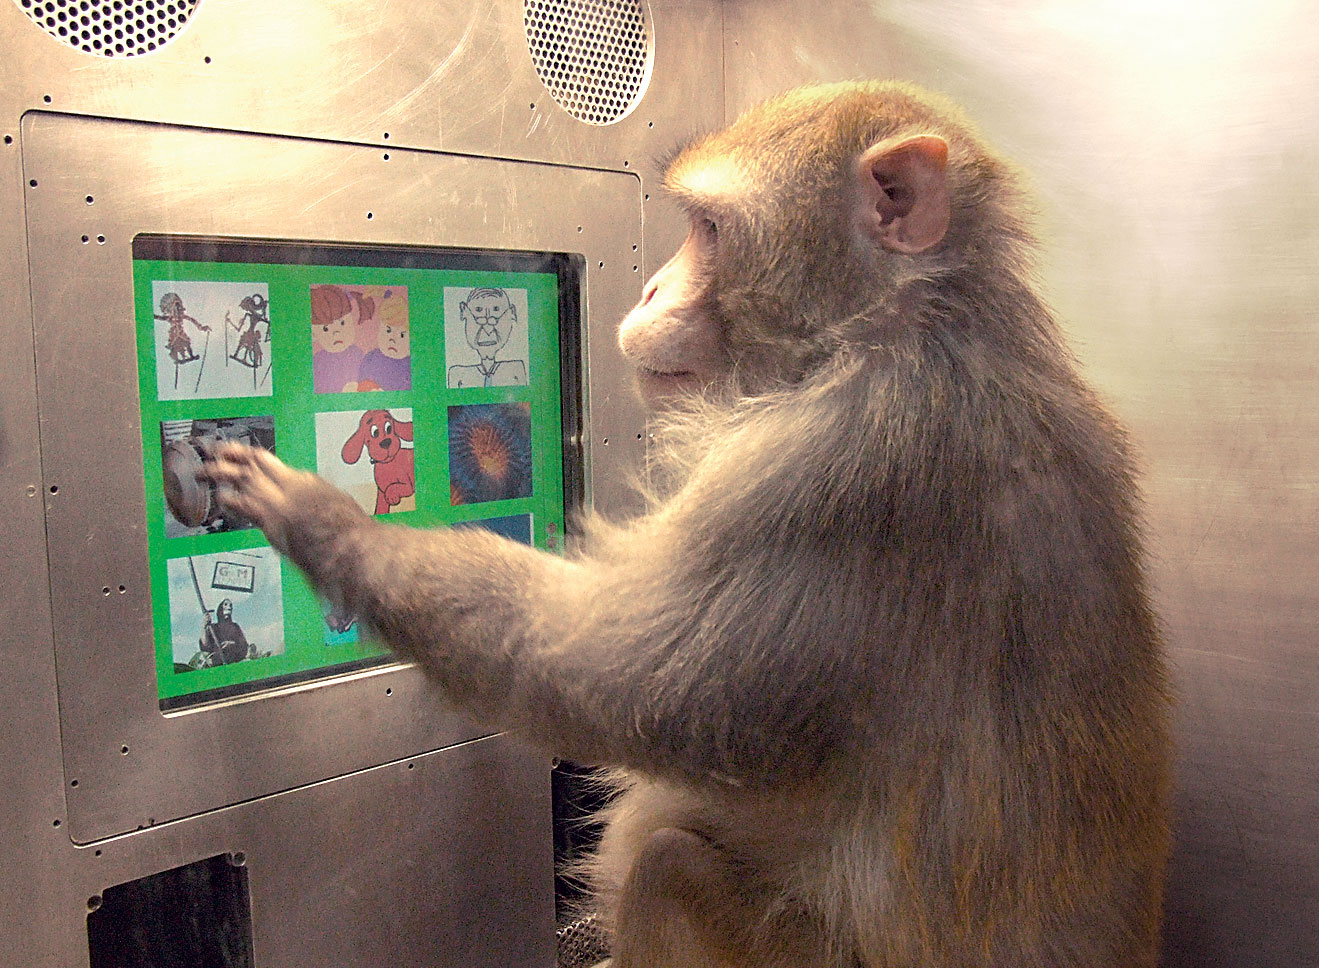 Monkey taking a metacognition test